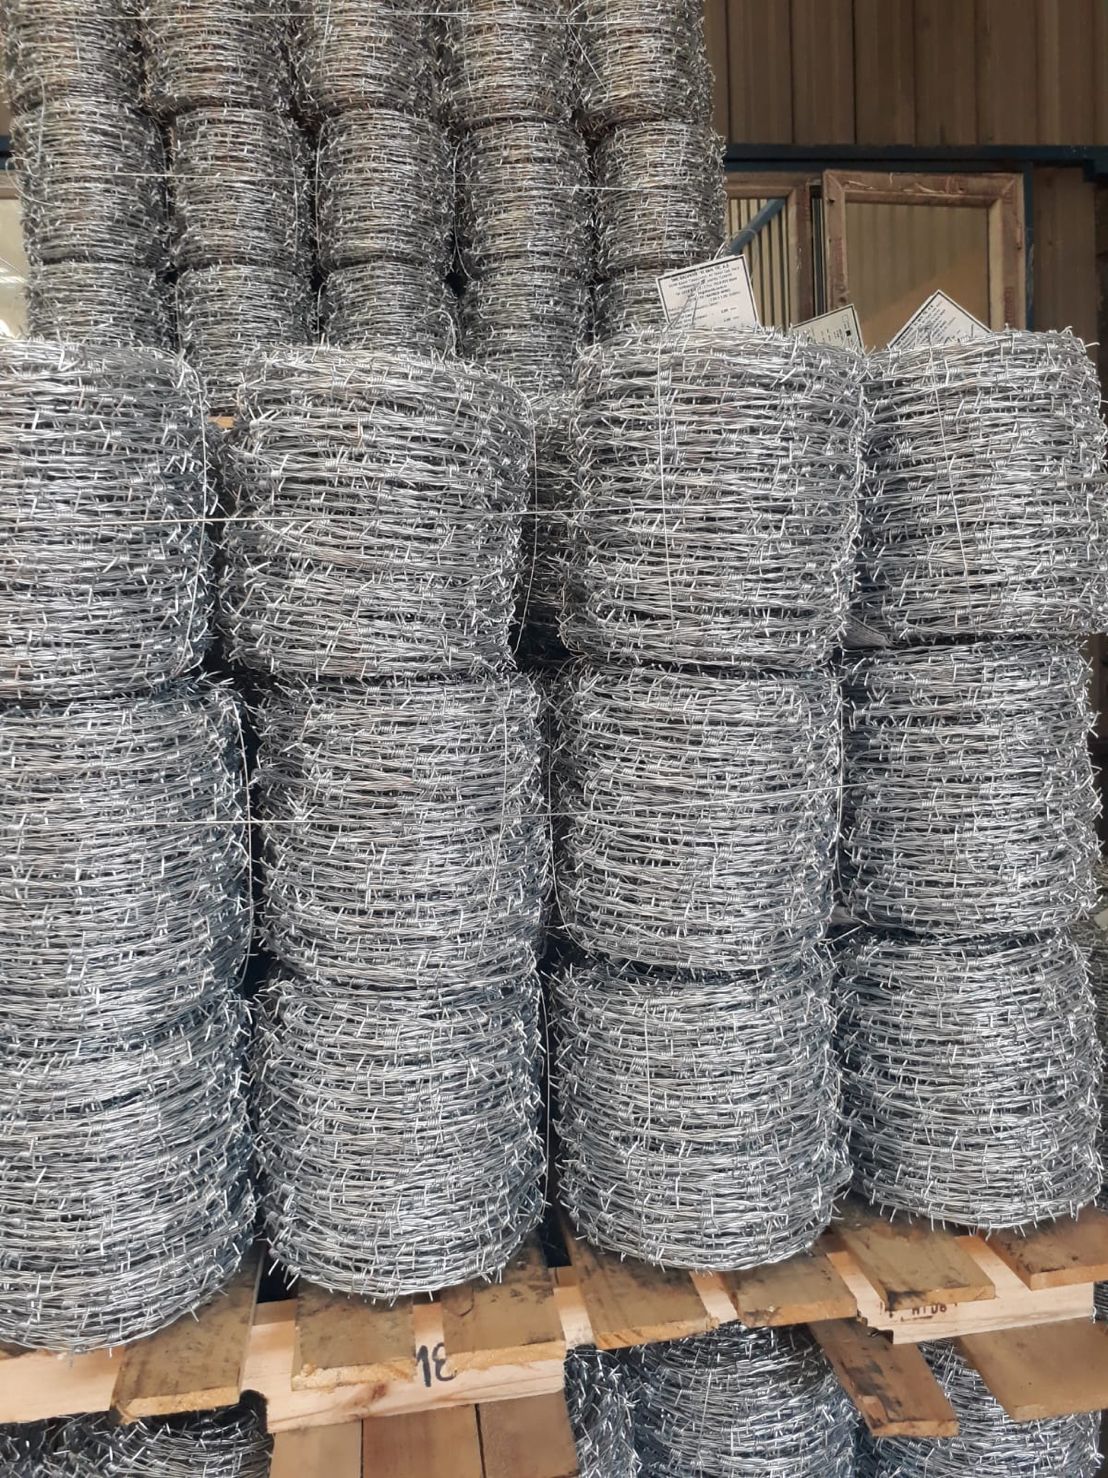 barbed wire-made in turkey-2022-cheap-good quality-expinno